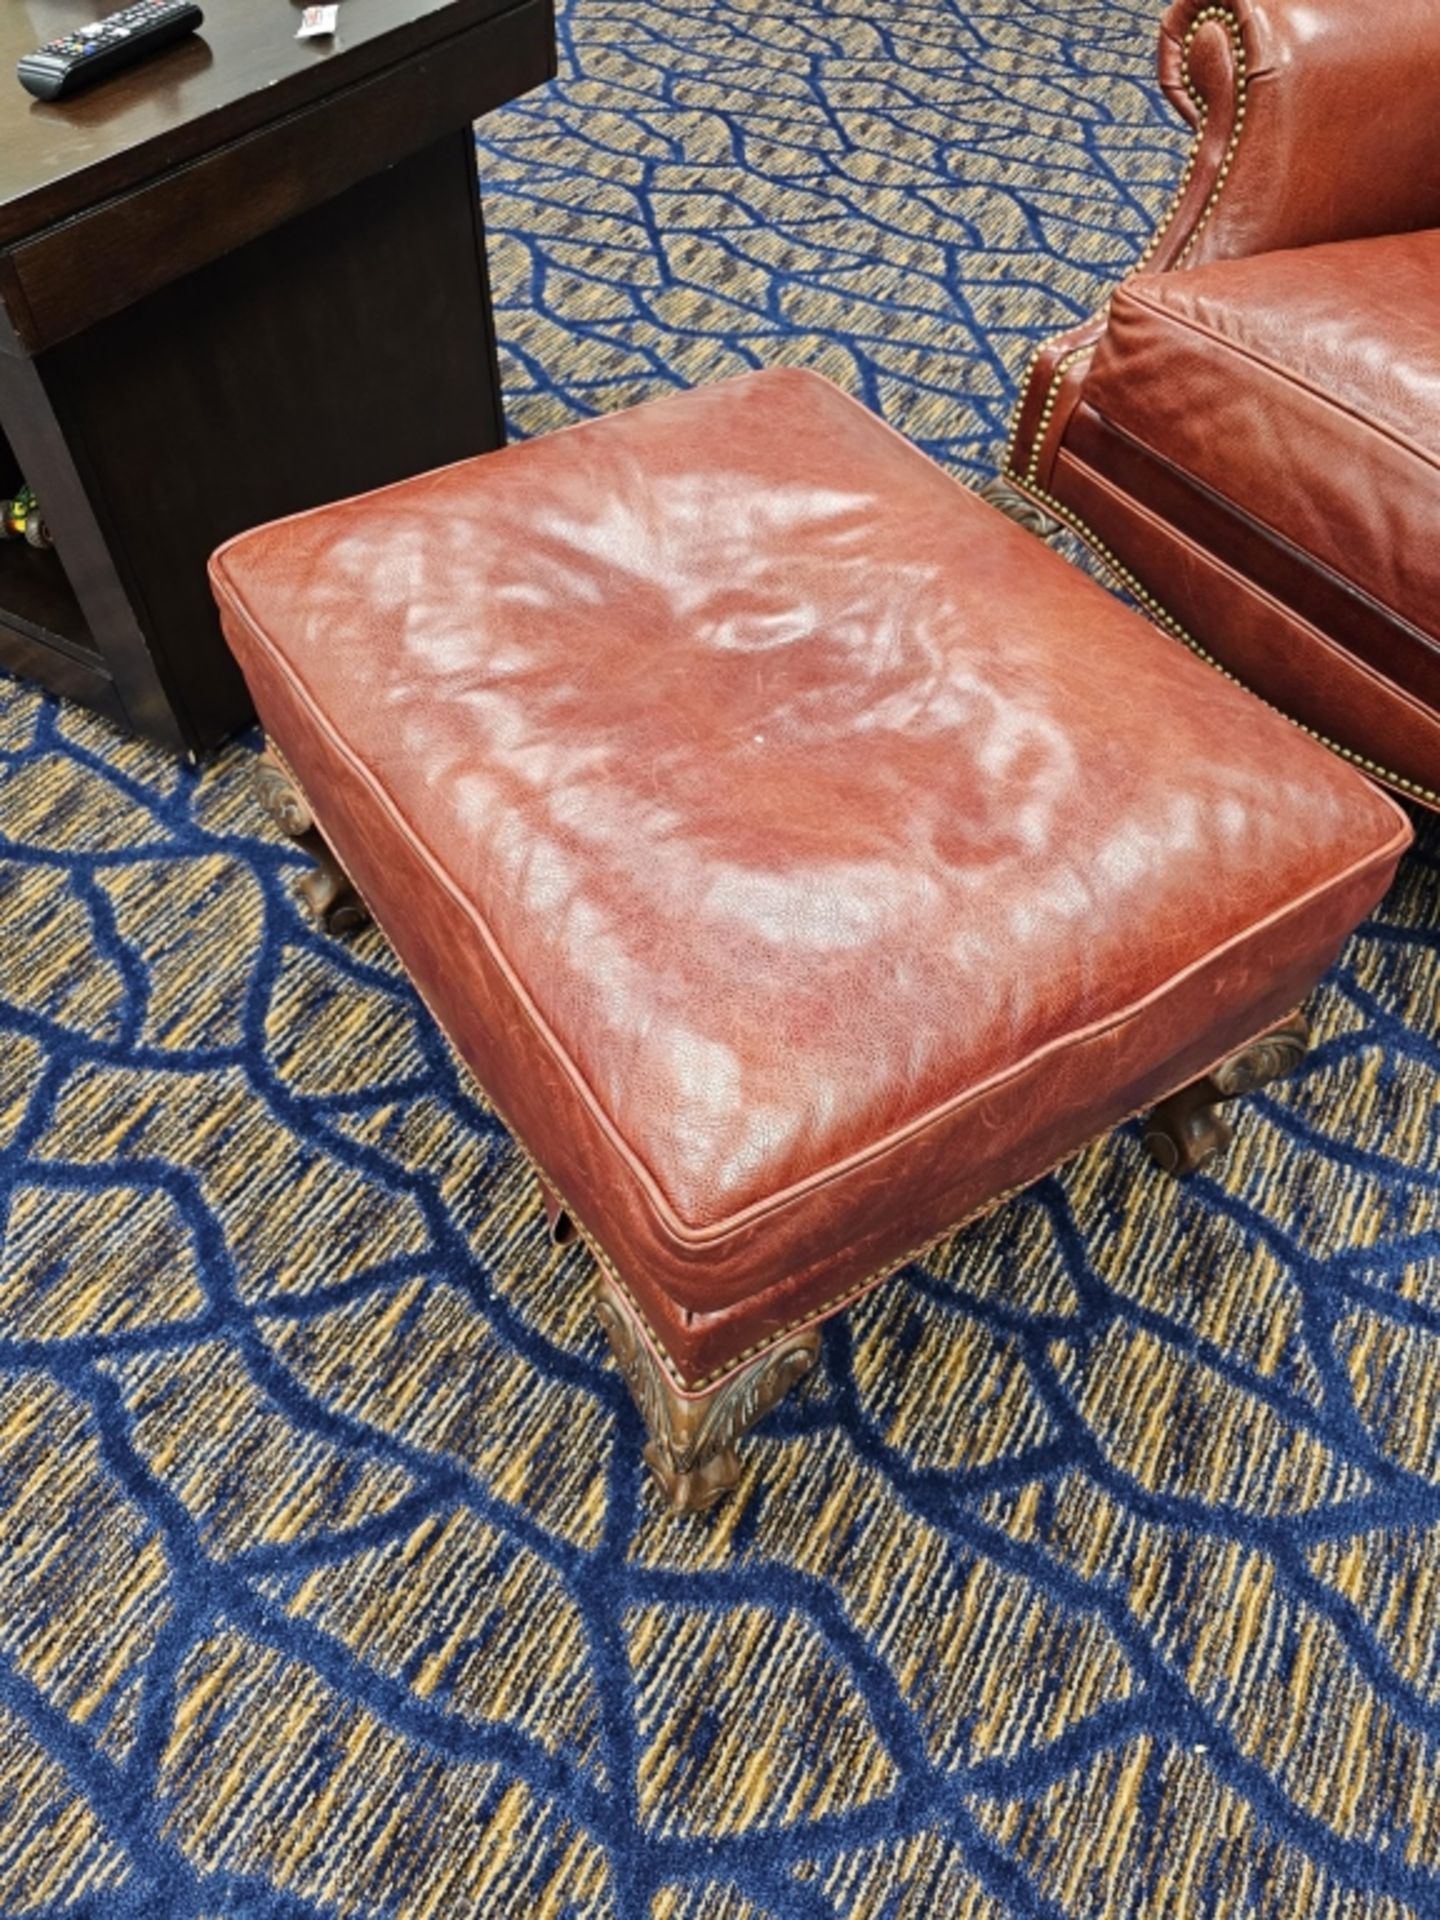 (2) Robb & Stucky Leather Chairs With Foot Stools - Image 5 of 11